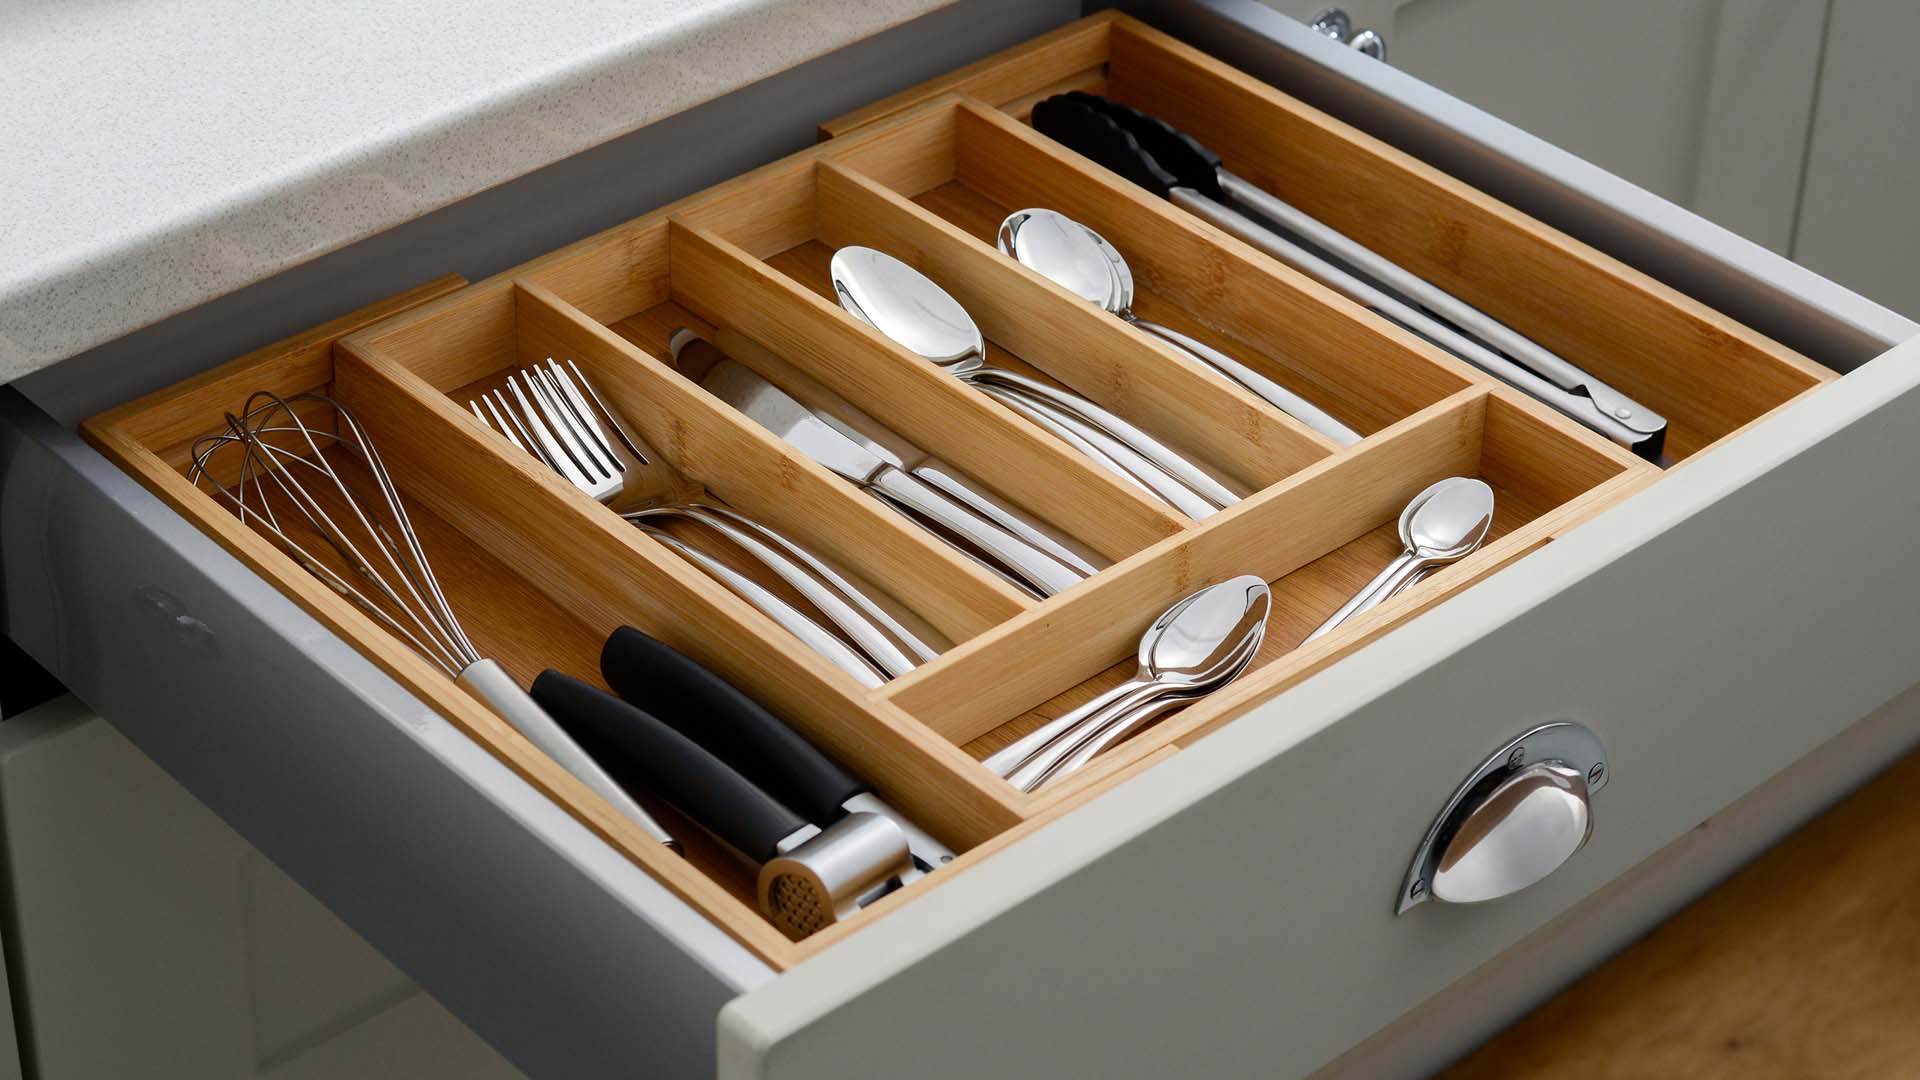 Keep cutlery organised with individual compartments, and don't overfill them.